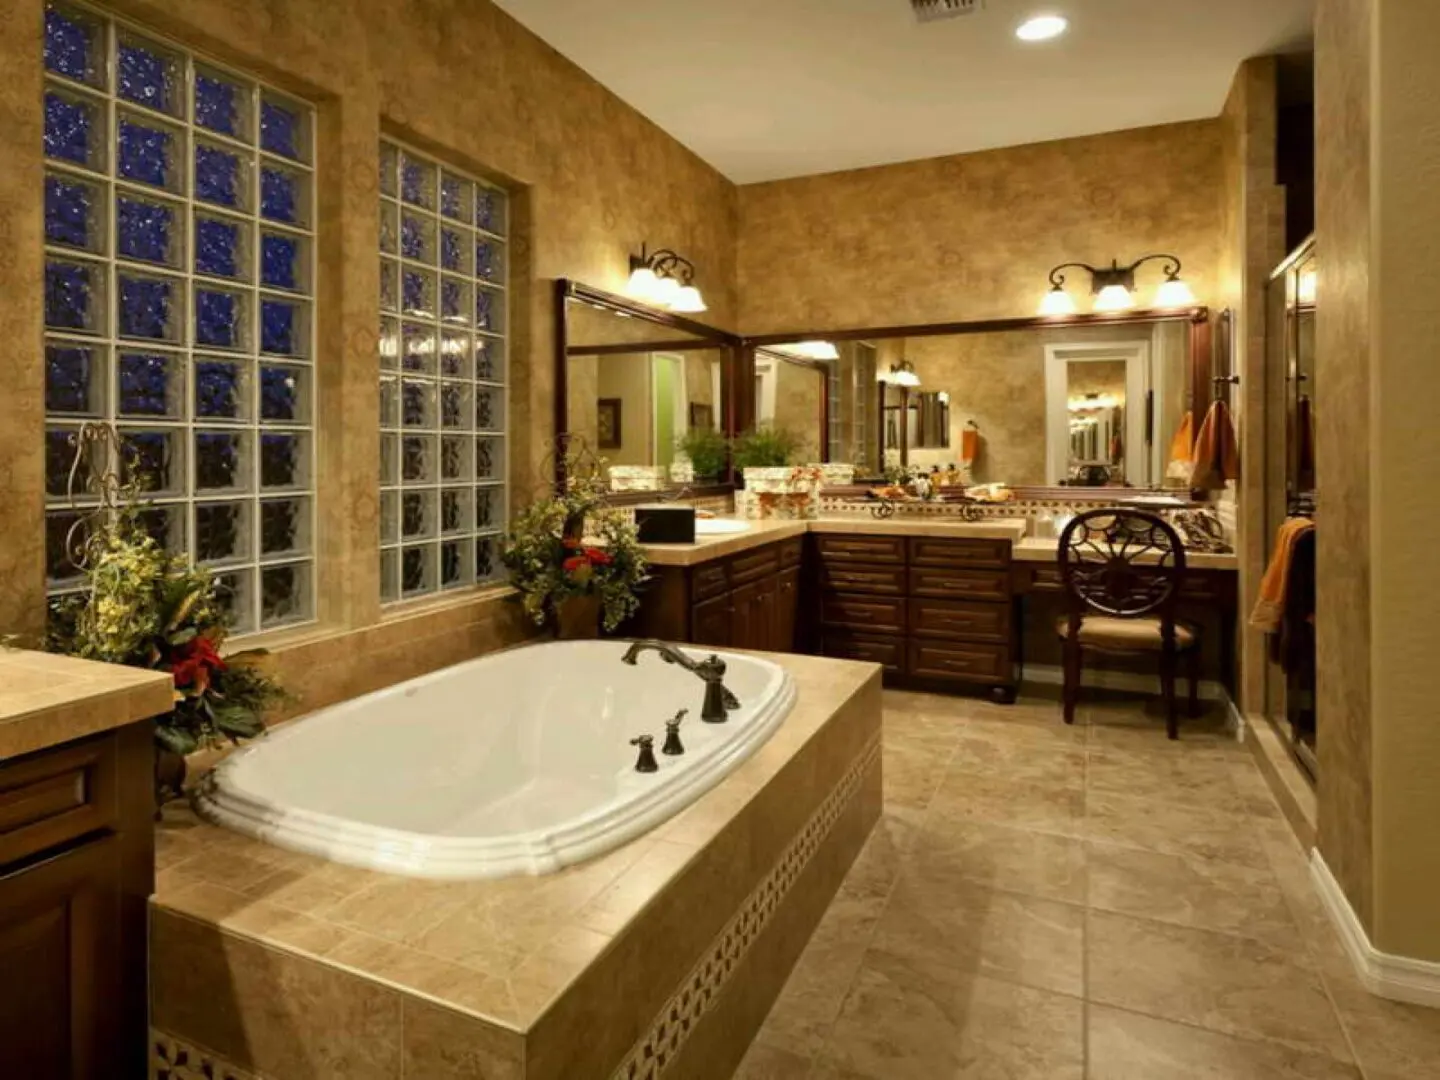 A bathroom with a large tub and sink.